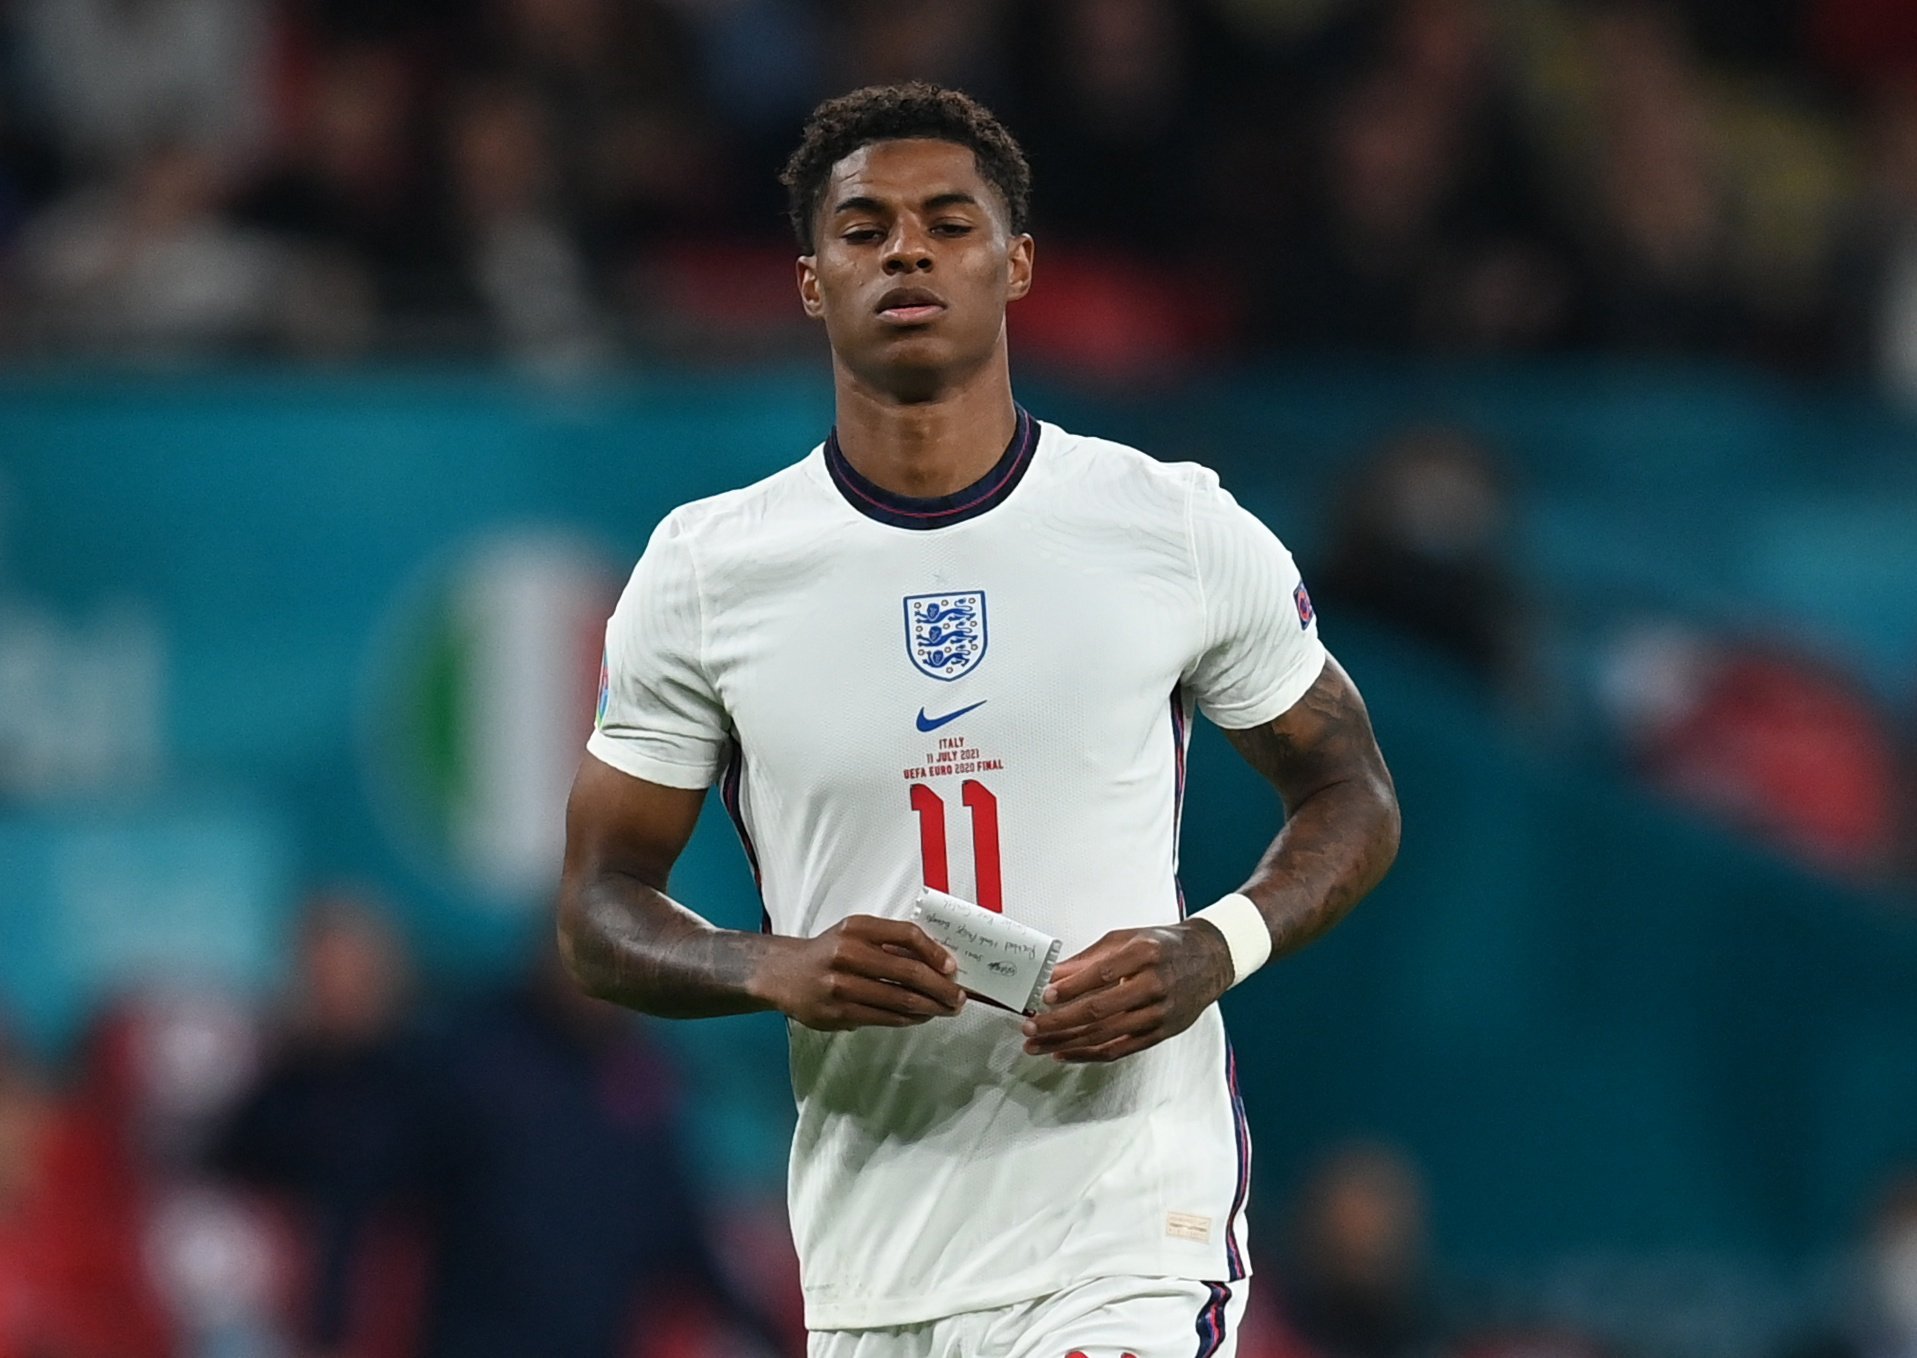 Marcus Rashford responds to racist abuse: ‘I will never apologise for who I am and where I came from’